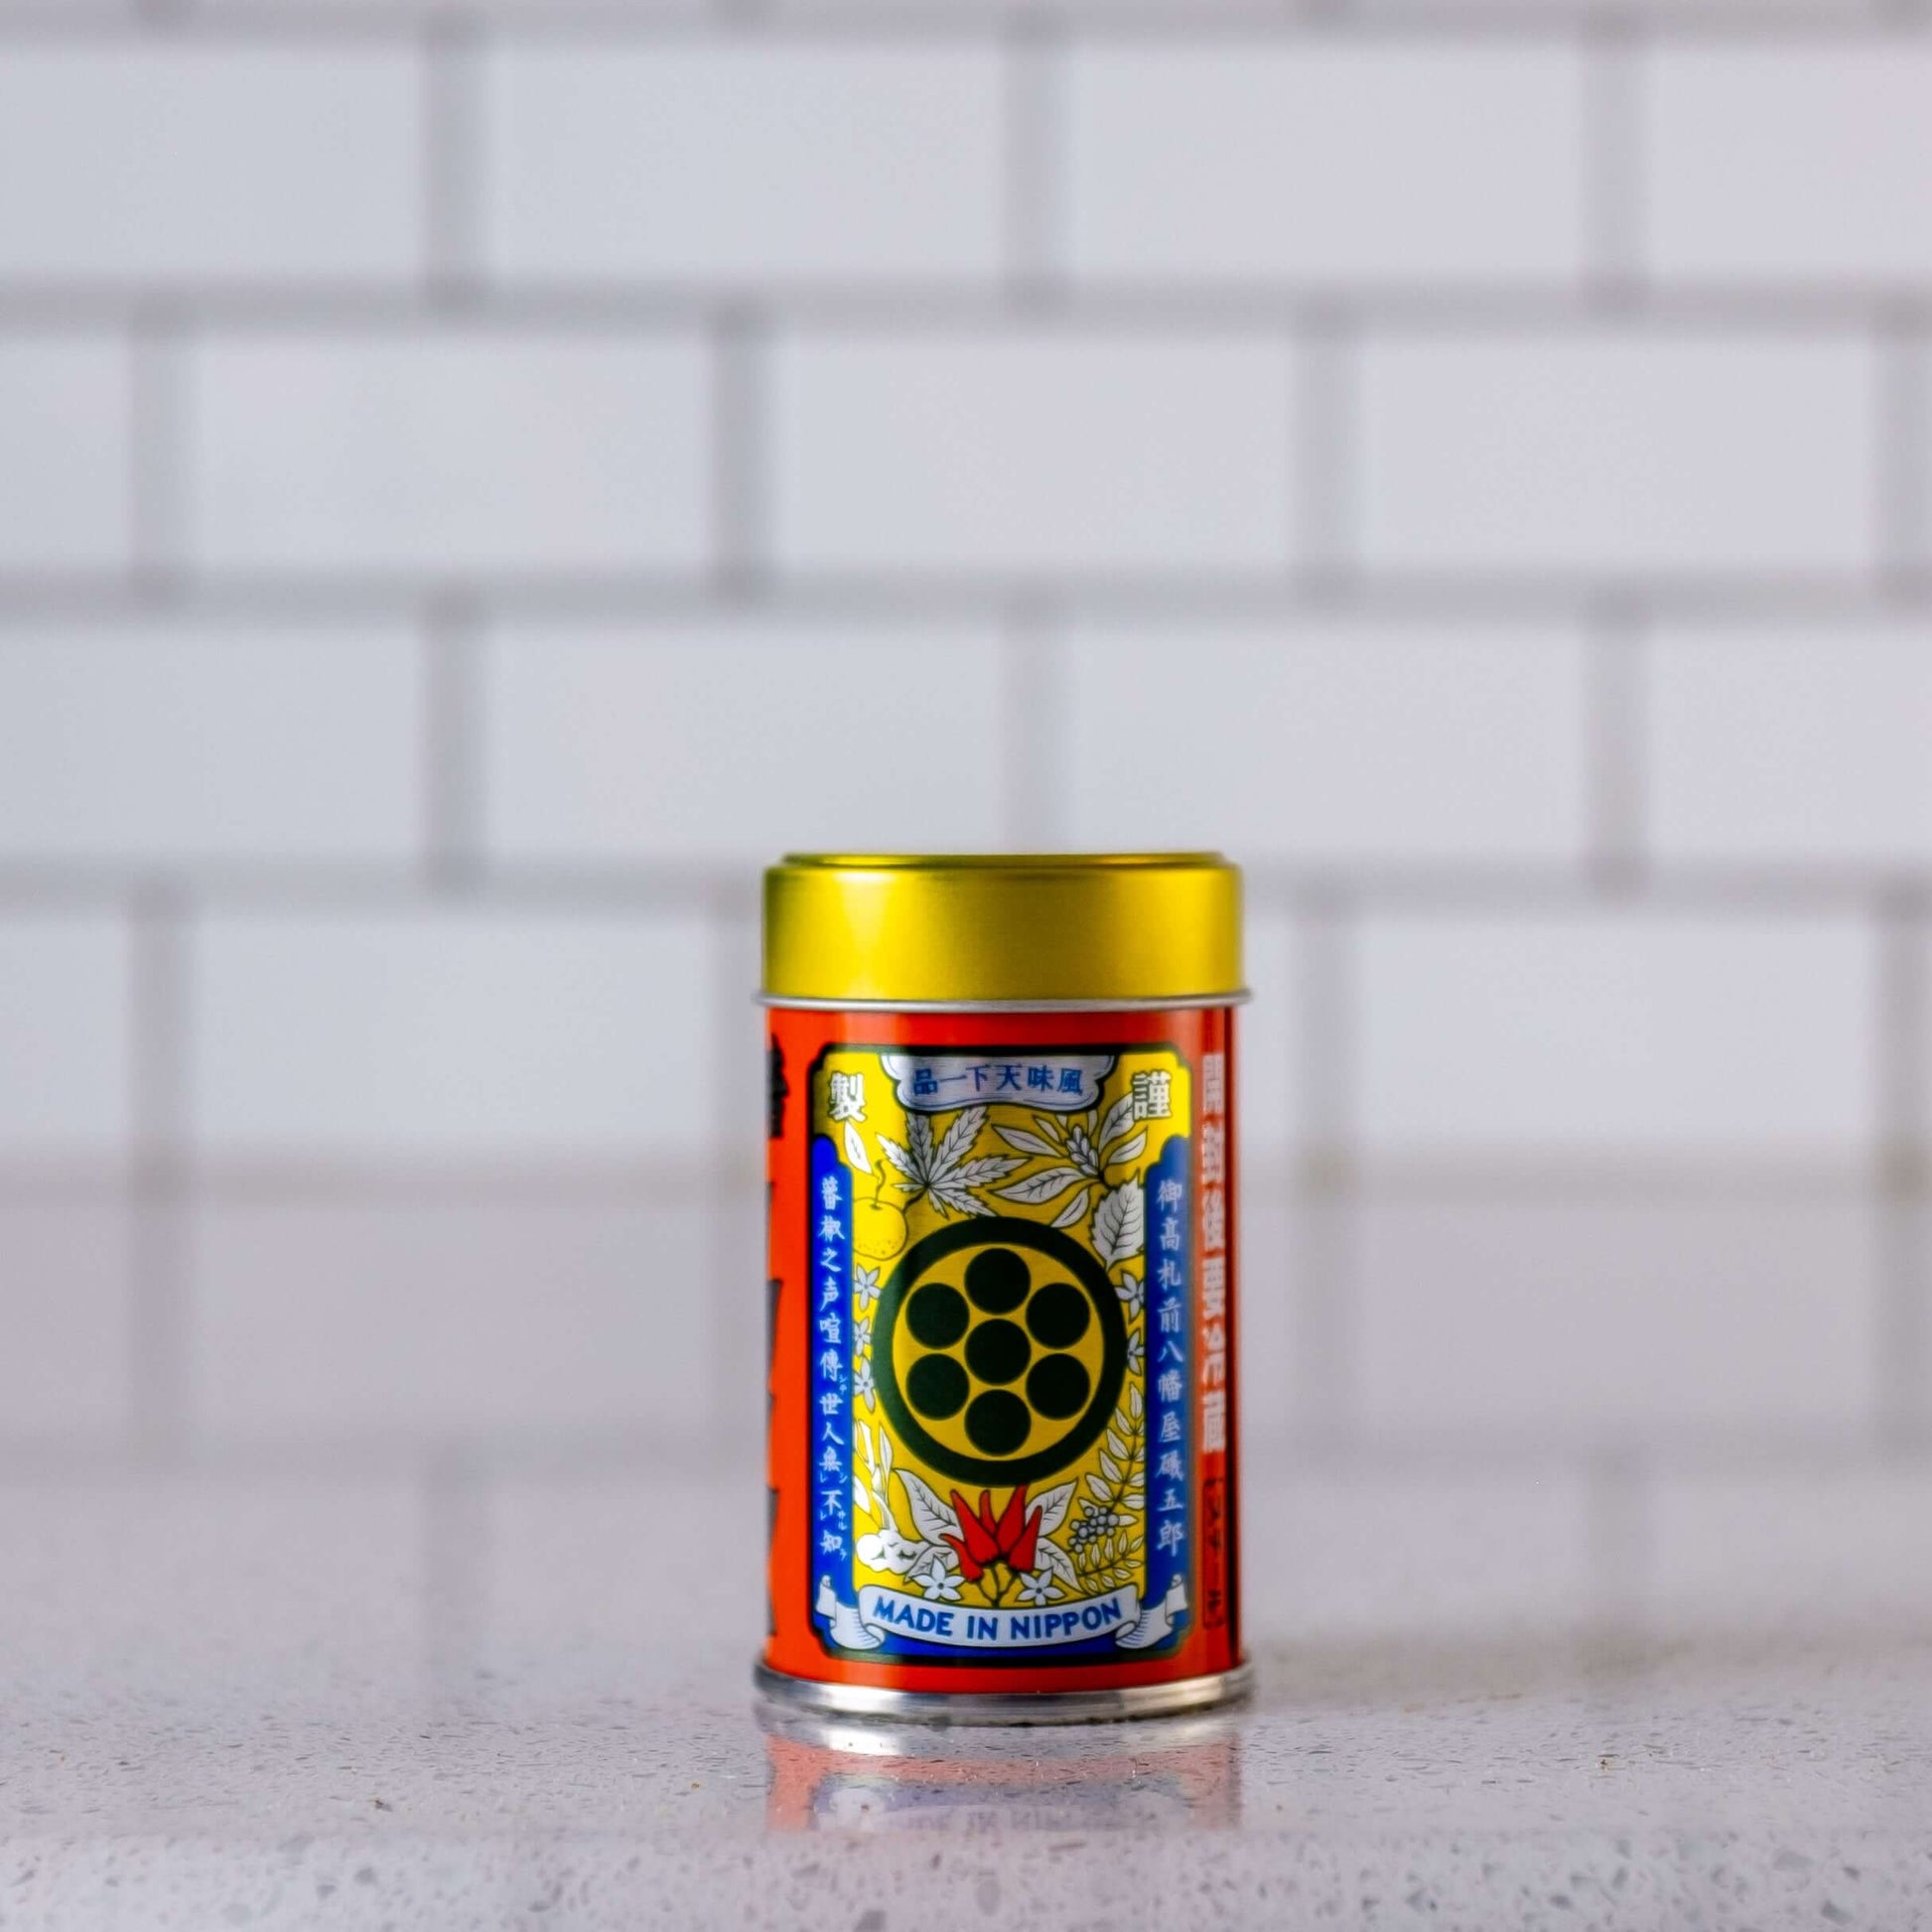 Togarashi (red pepper) canister on counter